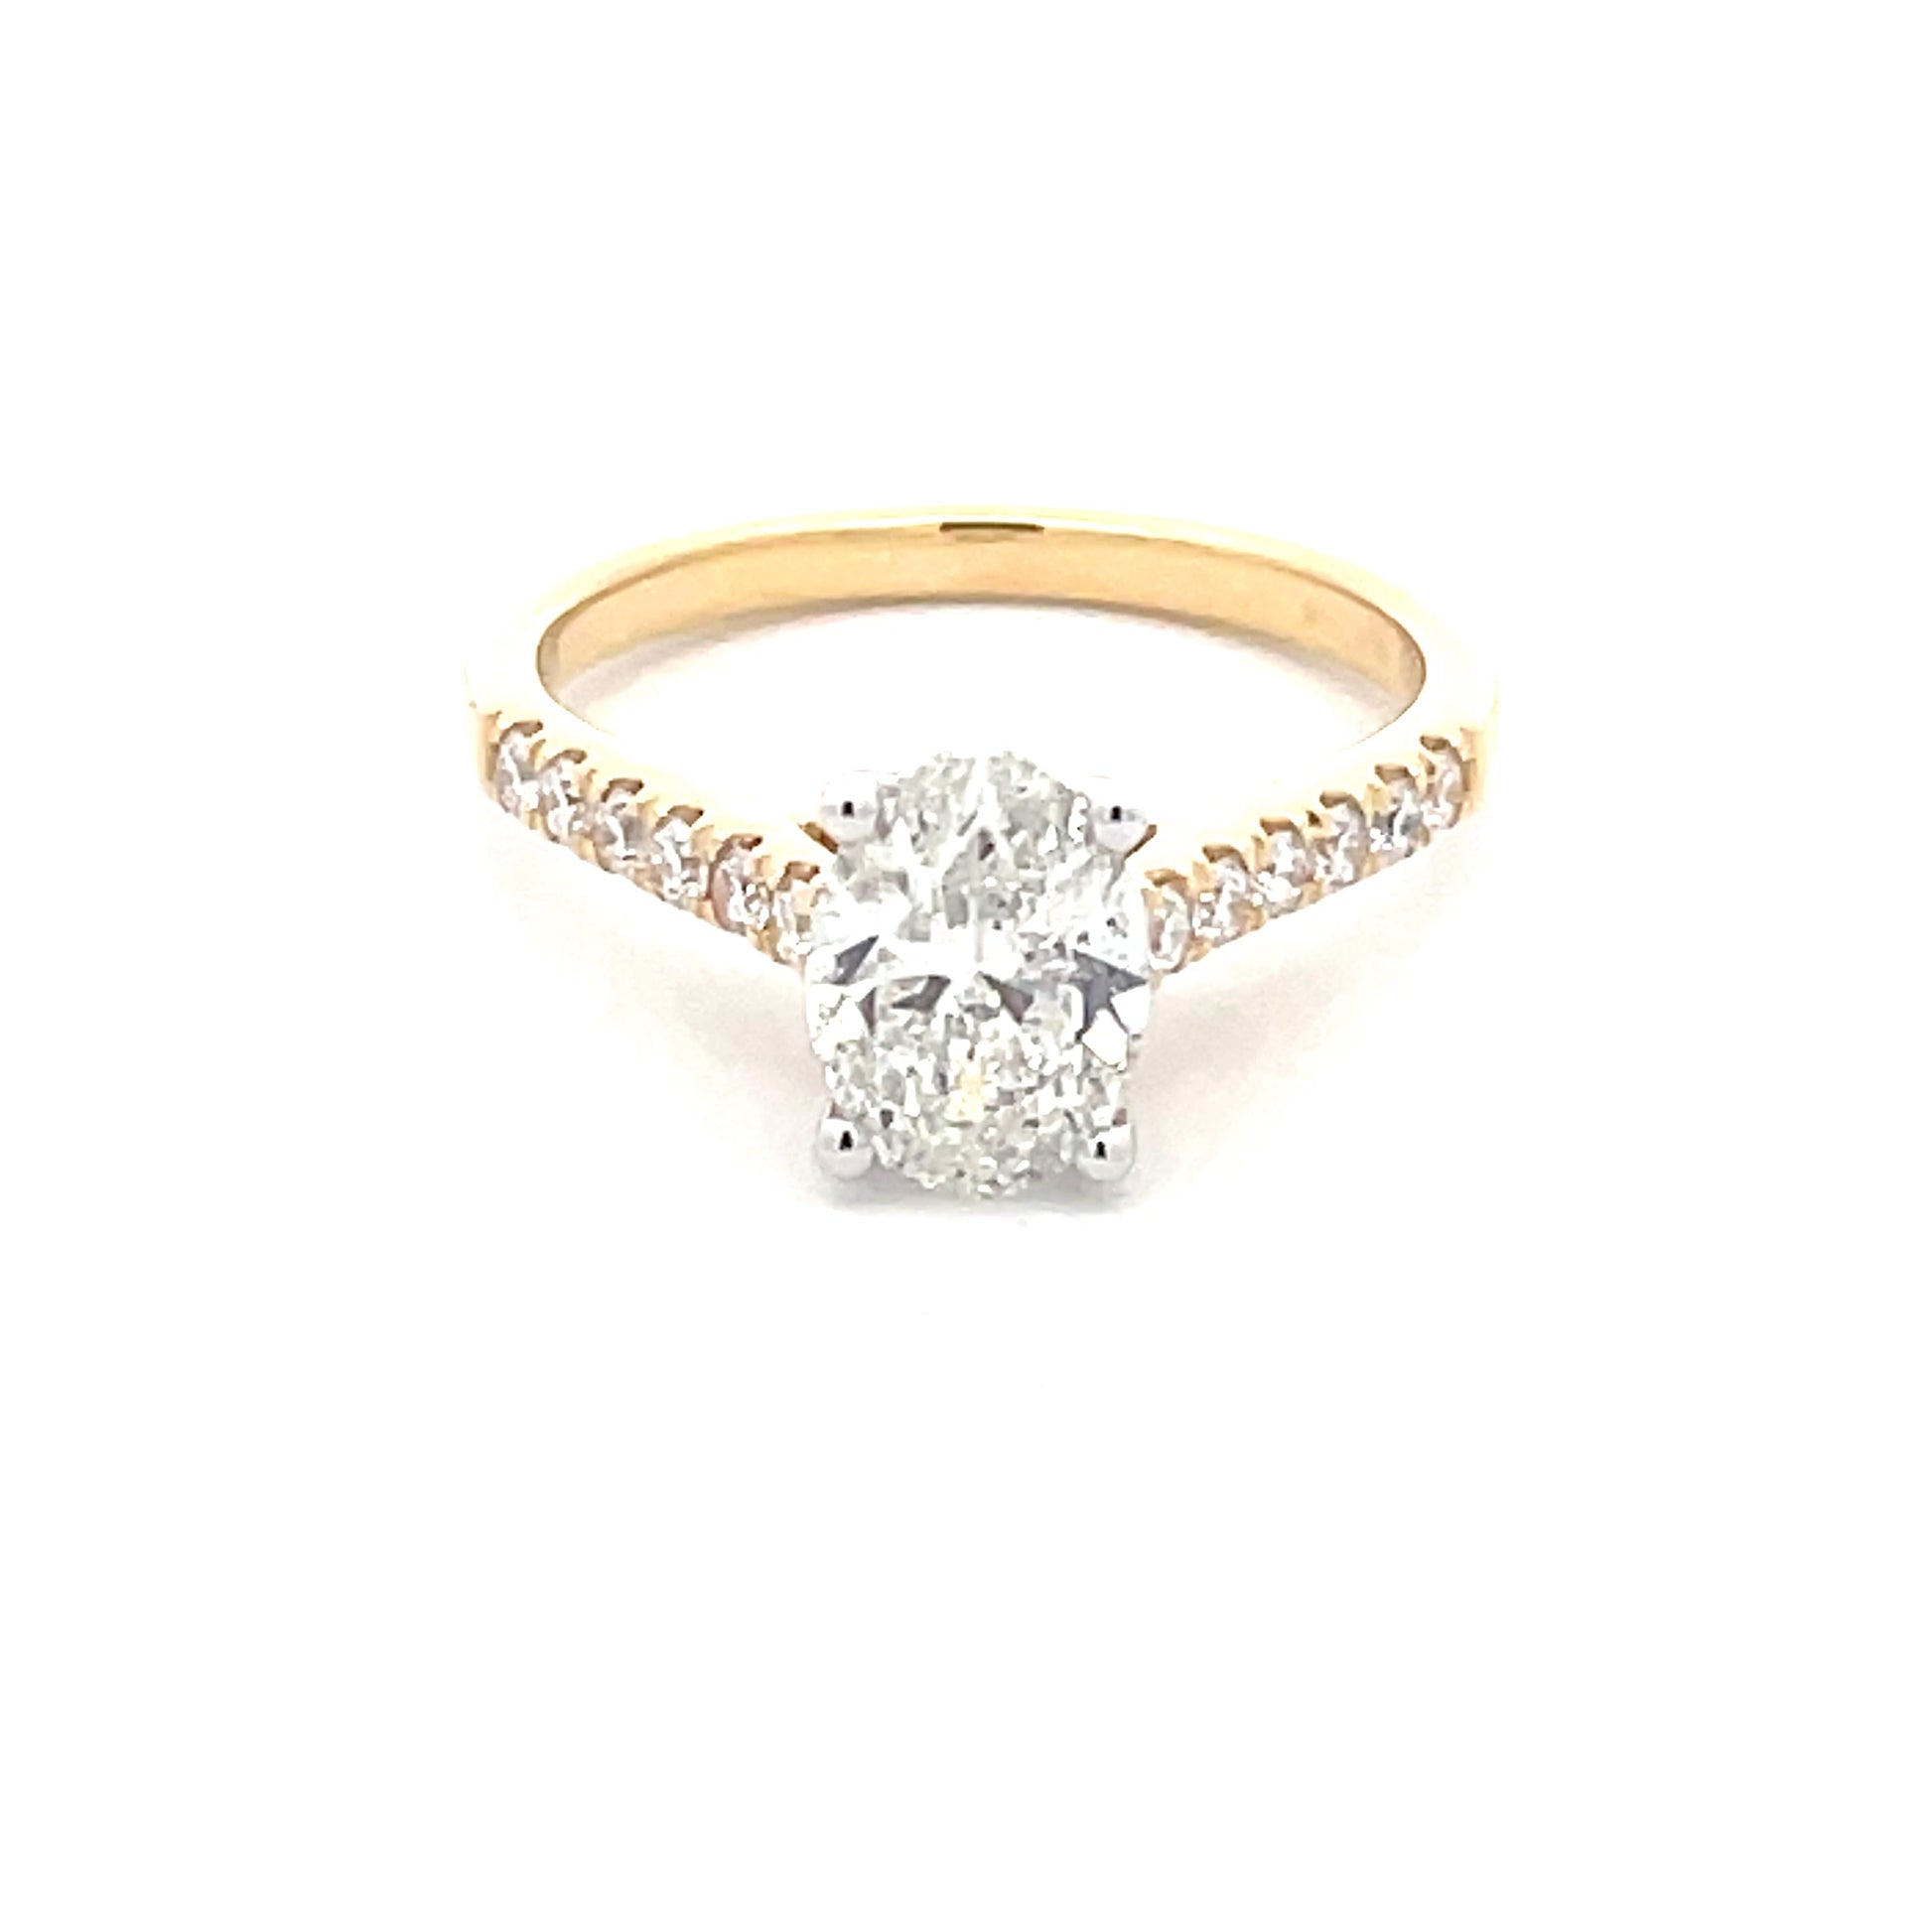 Oval Shaped Diamond Solitaire ring with diamond set shoulders - 1.45cts  Gardiner Brothers   